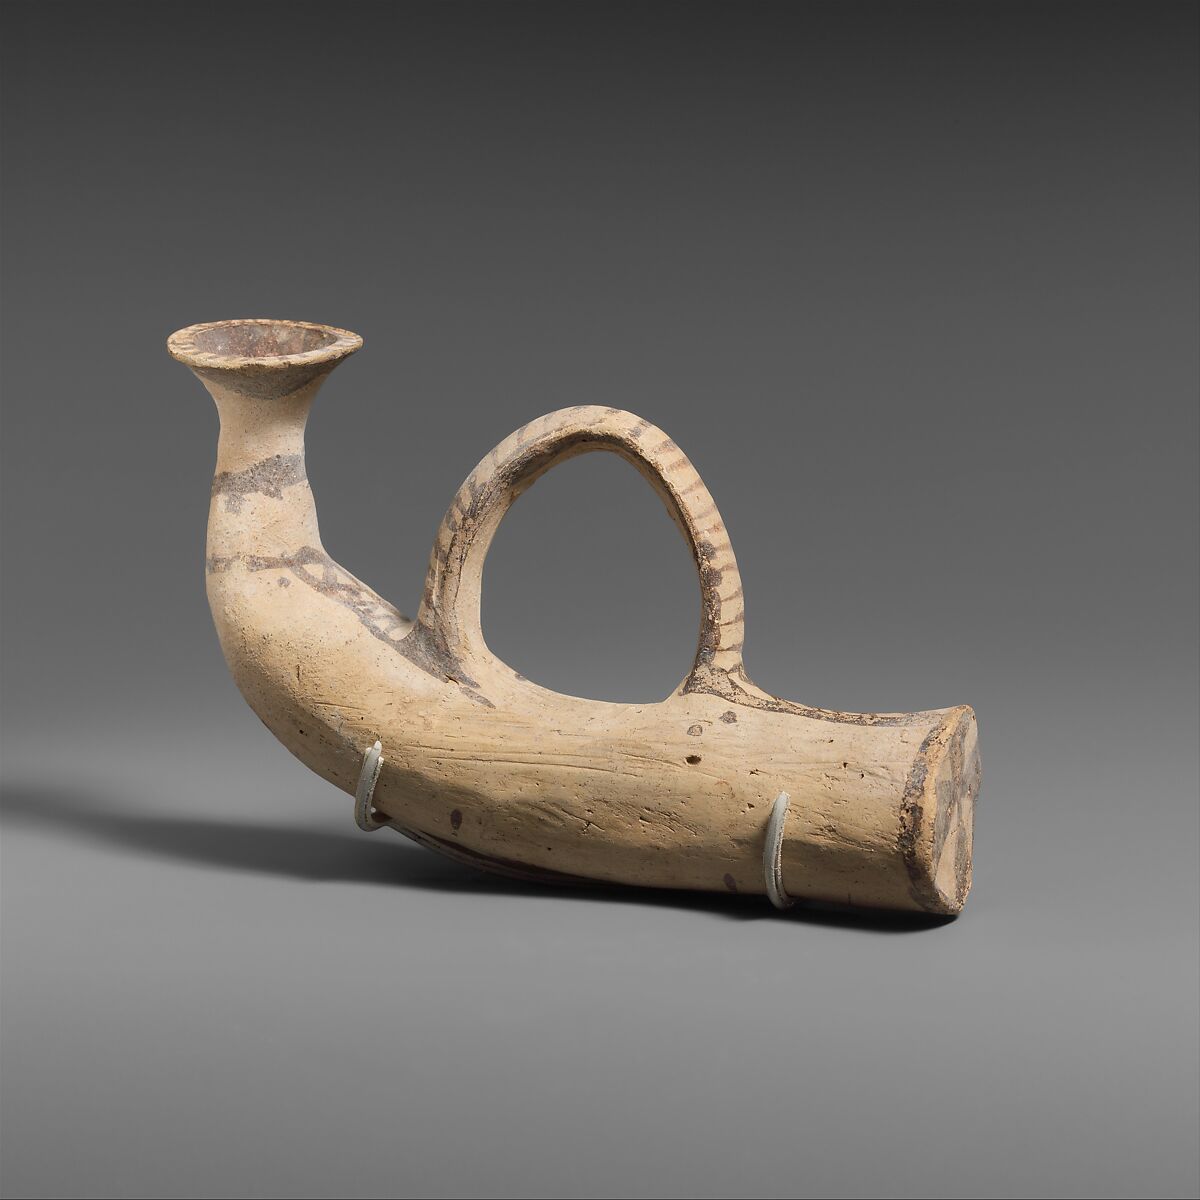 Terracotta vase in the shape of a horn, Terracotta, Cypriot 